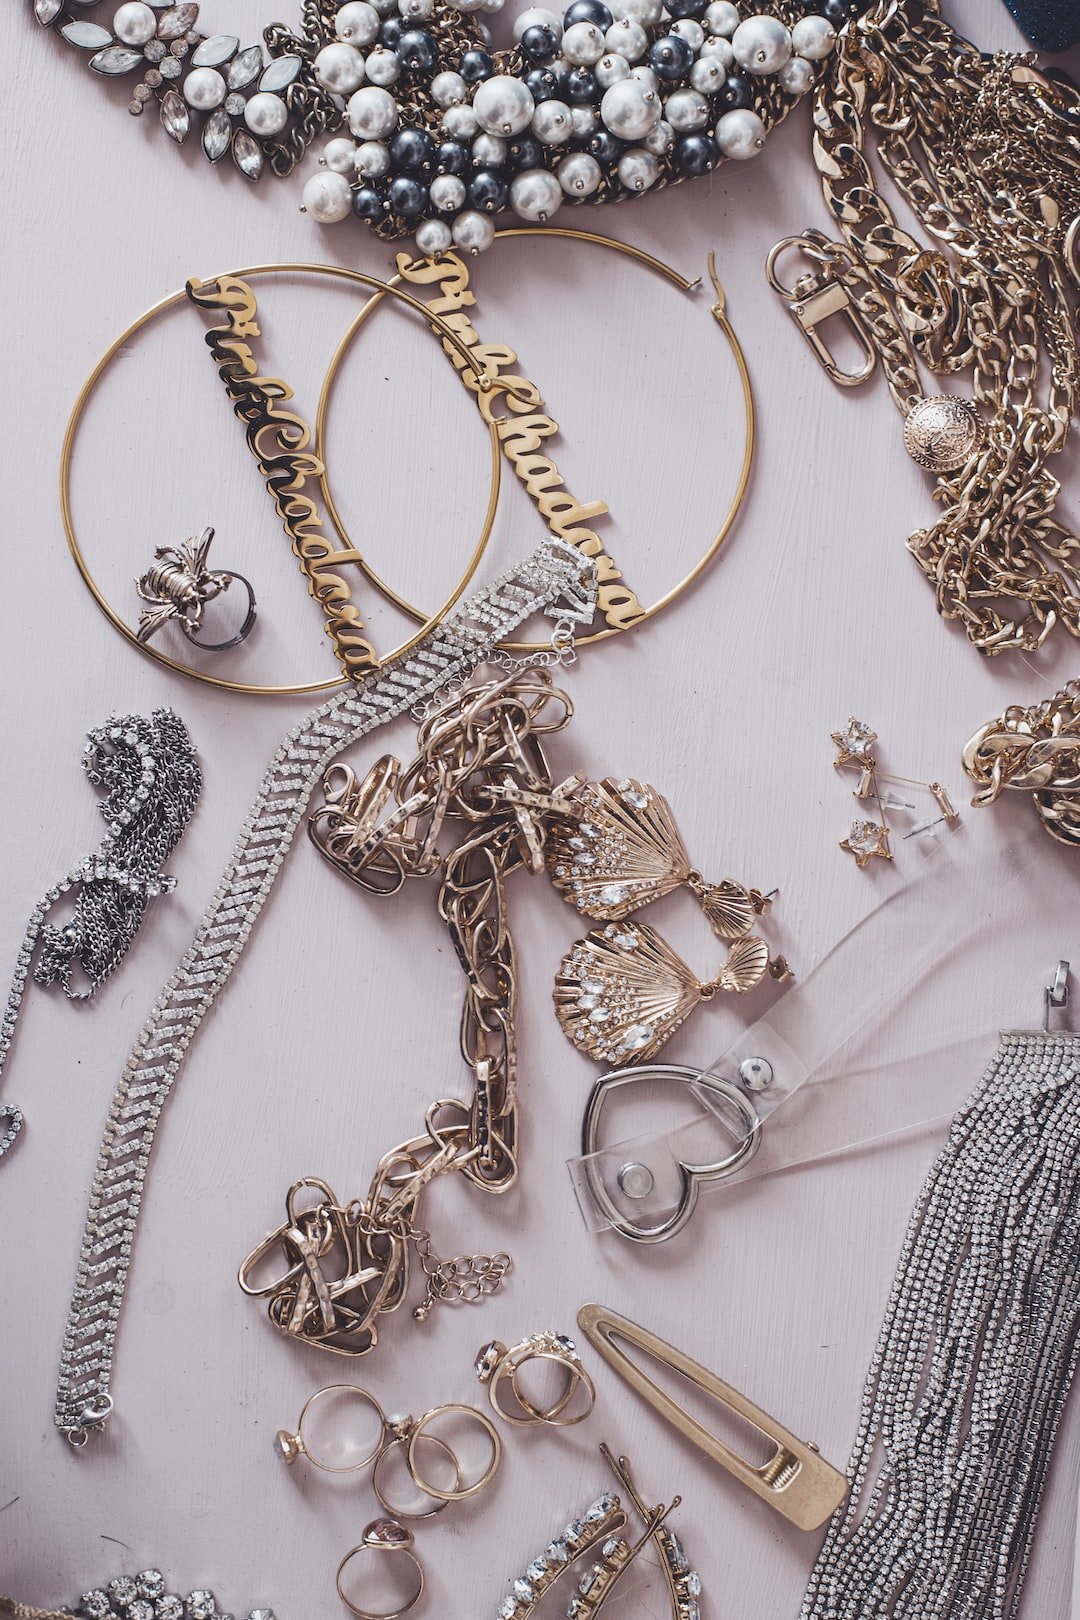 The Ultimate Guide to Jewelry: Necklaces, Earrings, Bracelets, and More! - TI.CO